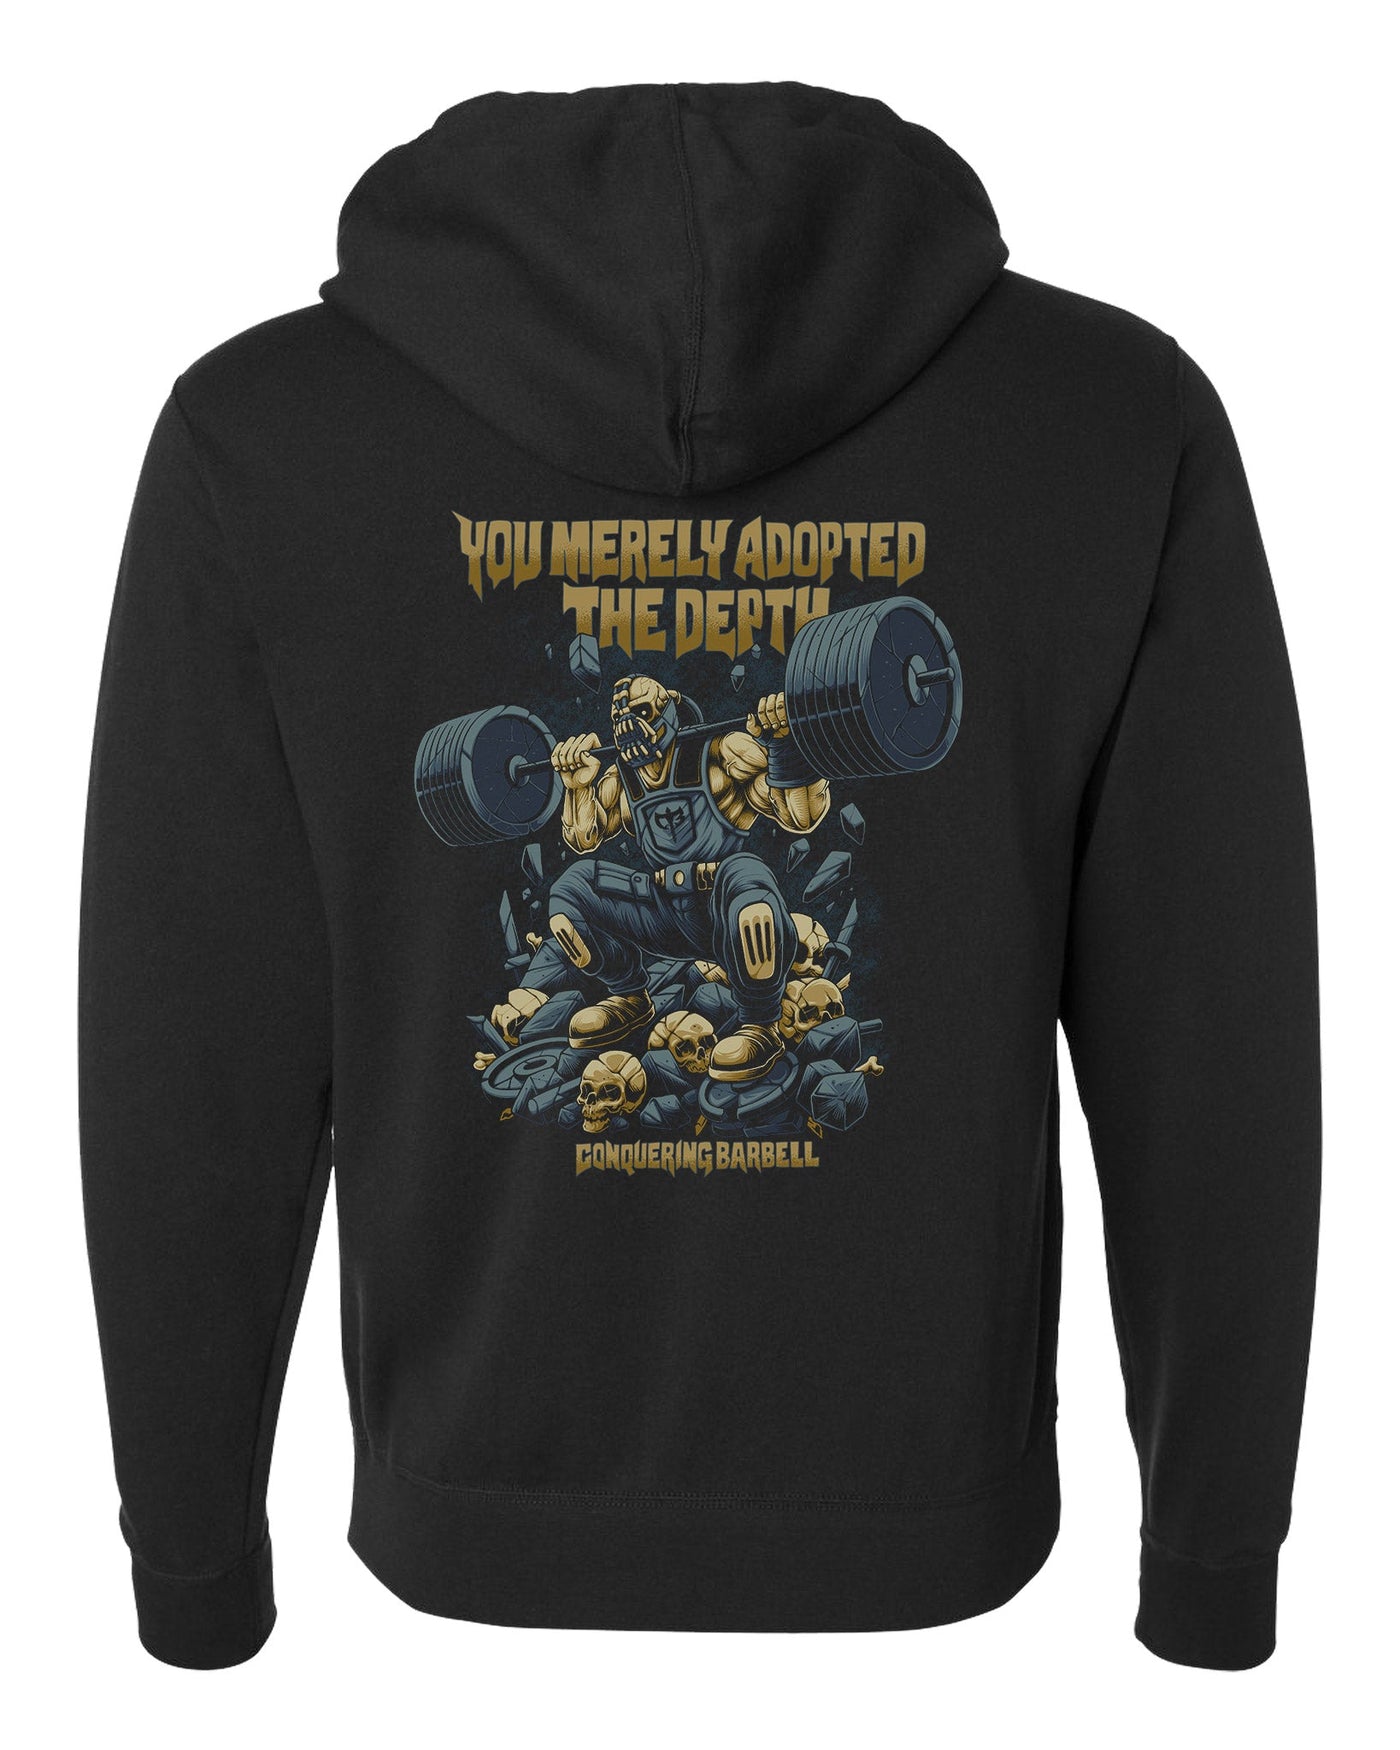 You Merely Adopted the Depth - on Black Pullover Hoodie - Conquering Barbell